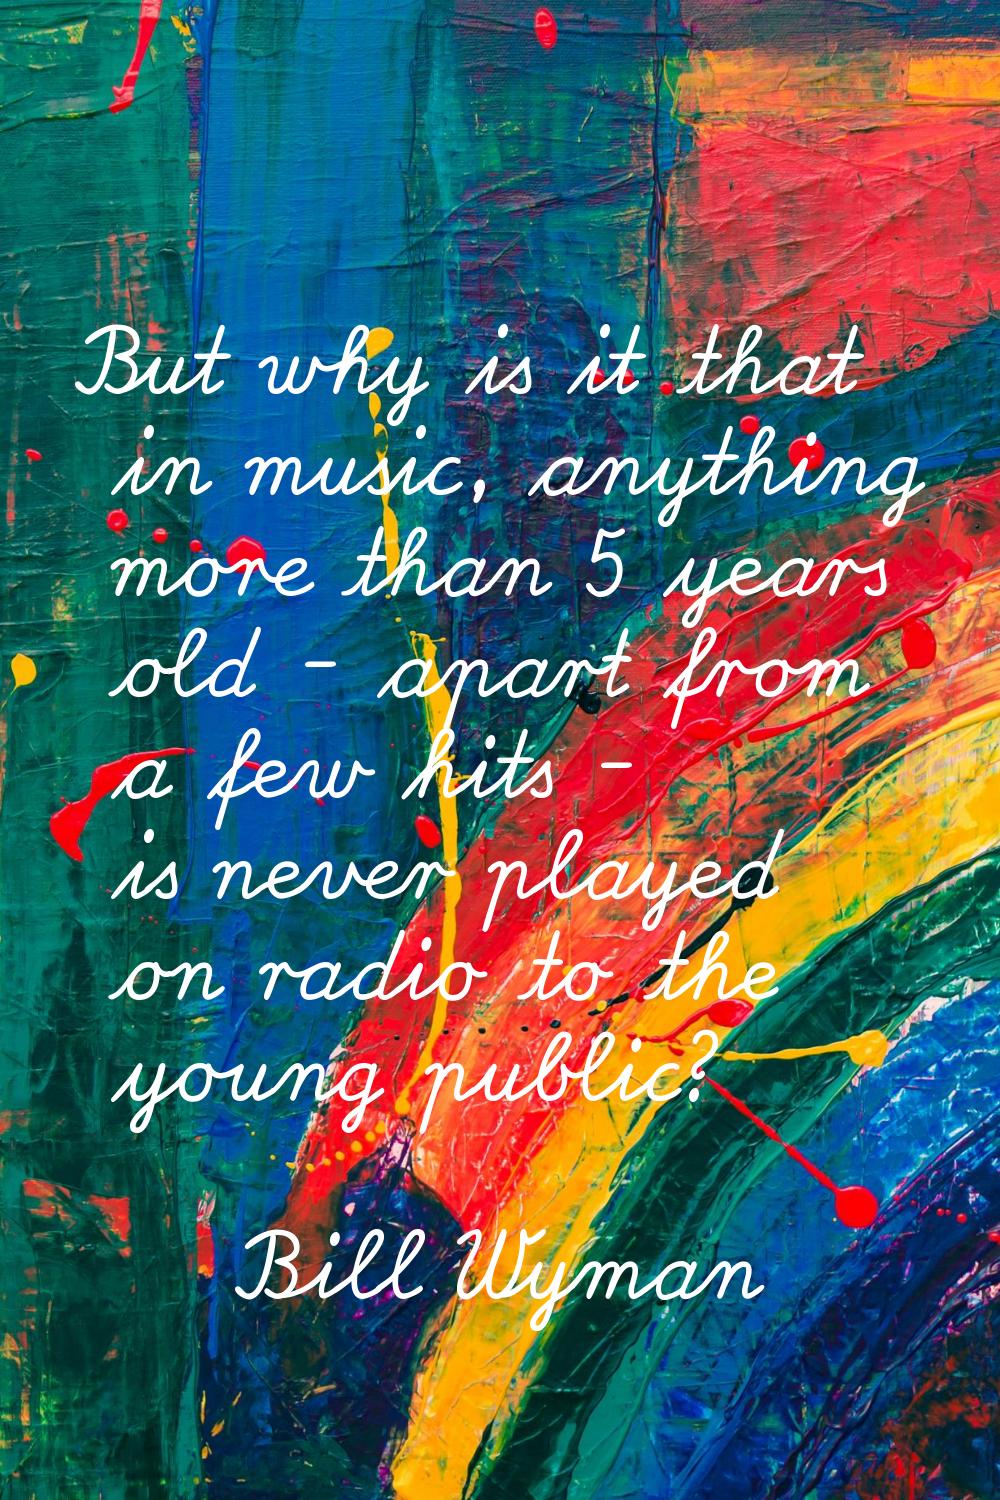 But why is it that in music, anything more than 5 years old - apart from a few hits - is never play